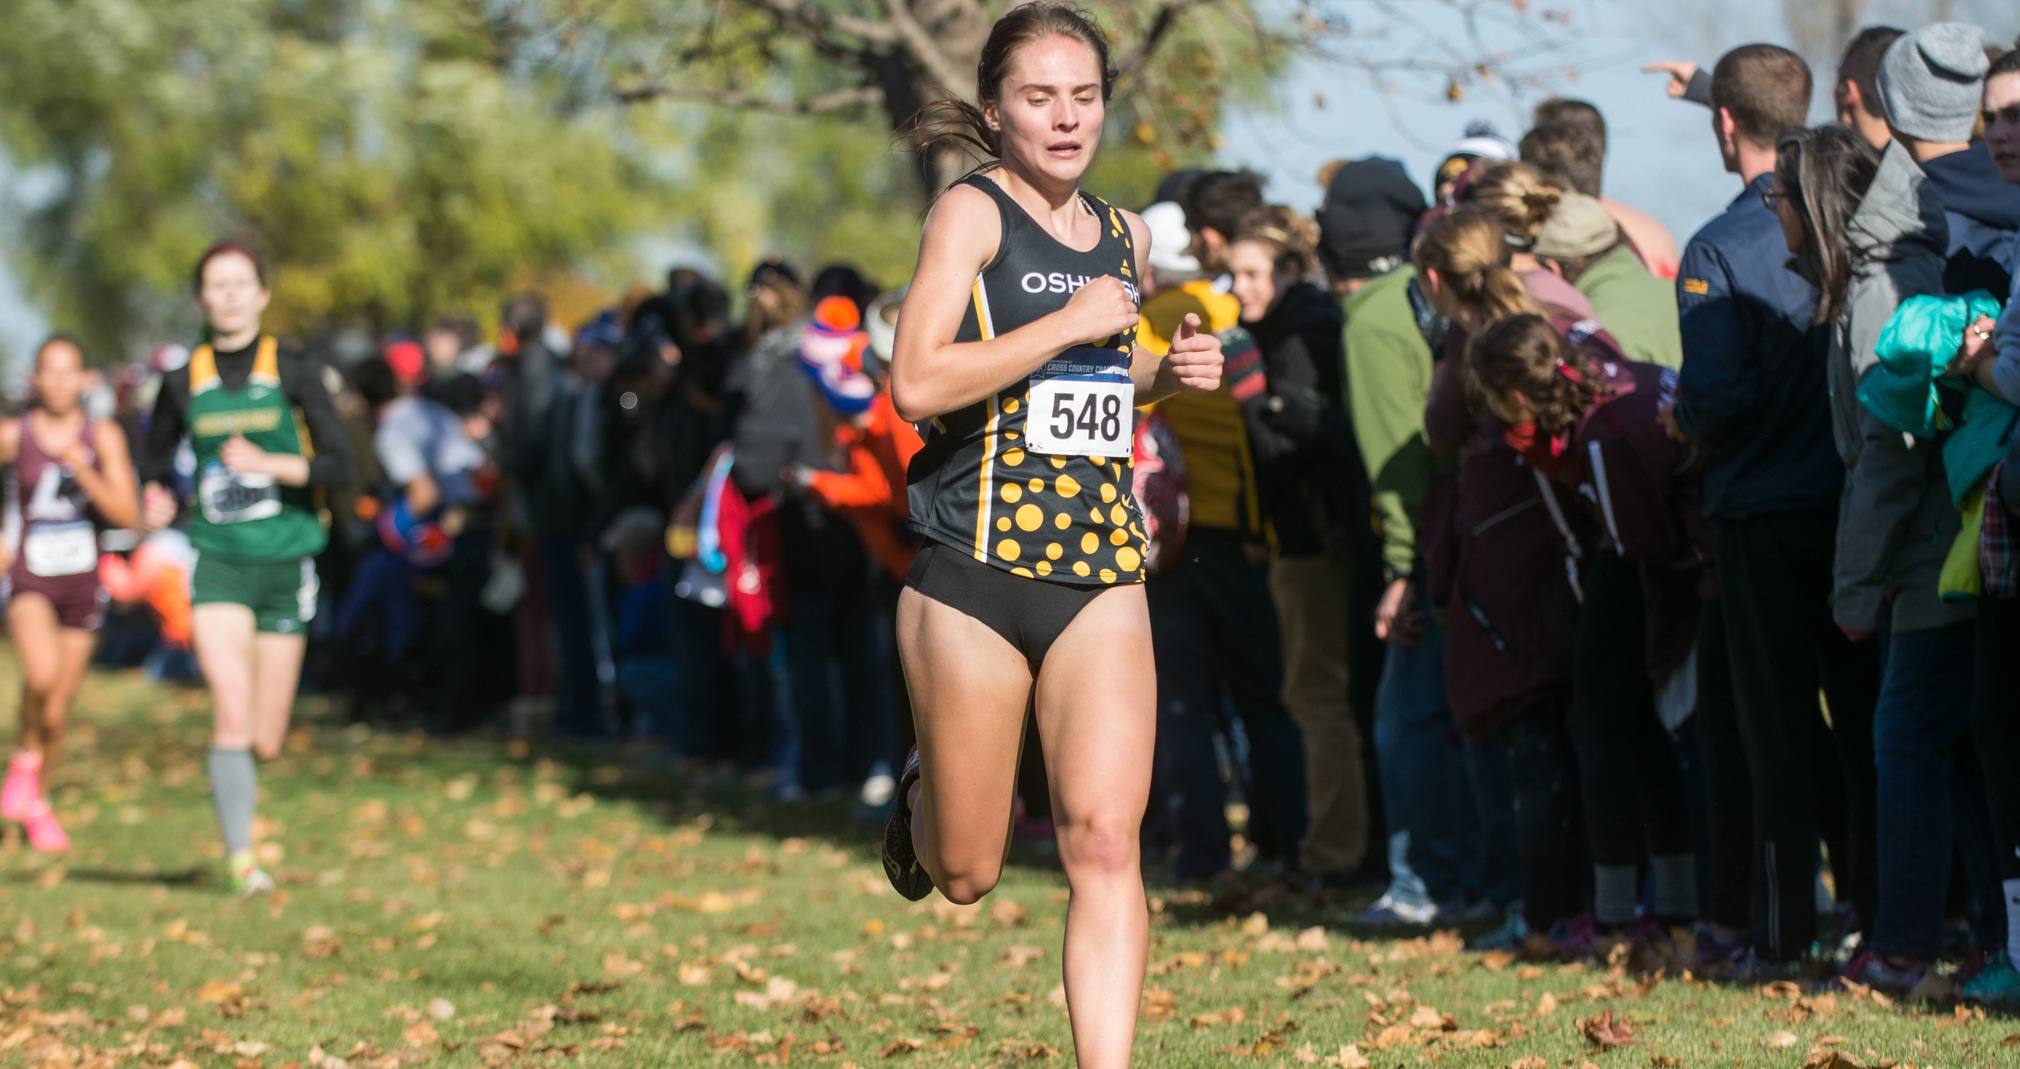 Cheyenne Moore has defeated all 409 runners she has competed against the past two races.